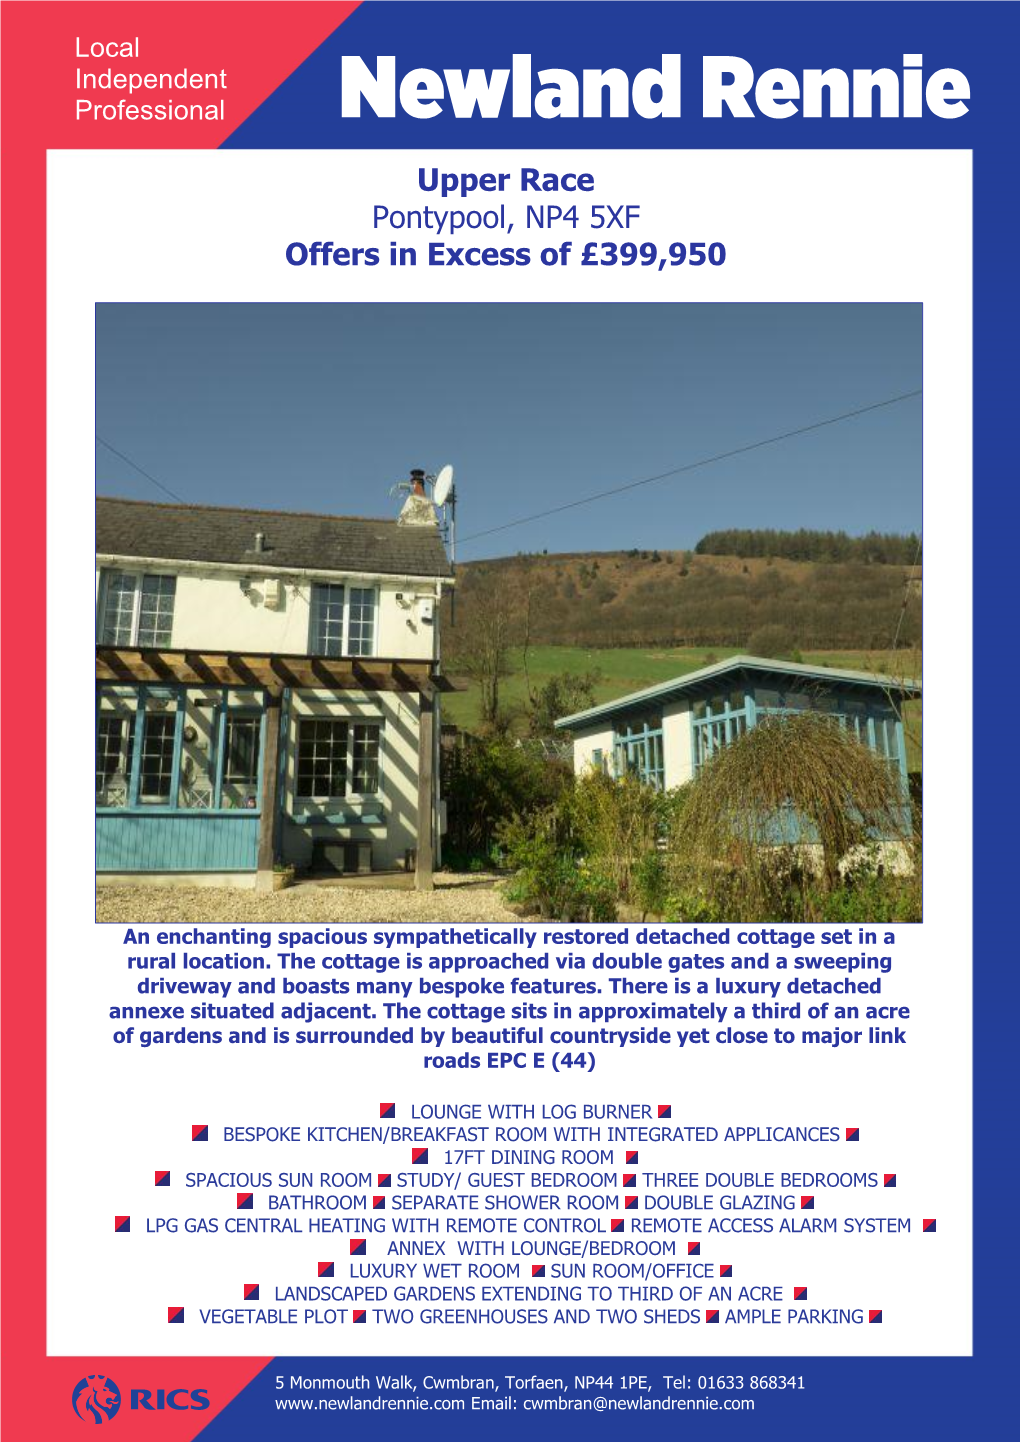 Upper Race Pontypool, NP4 5XF Offers in Excess of £399,950